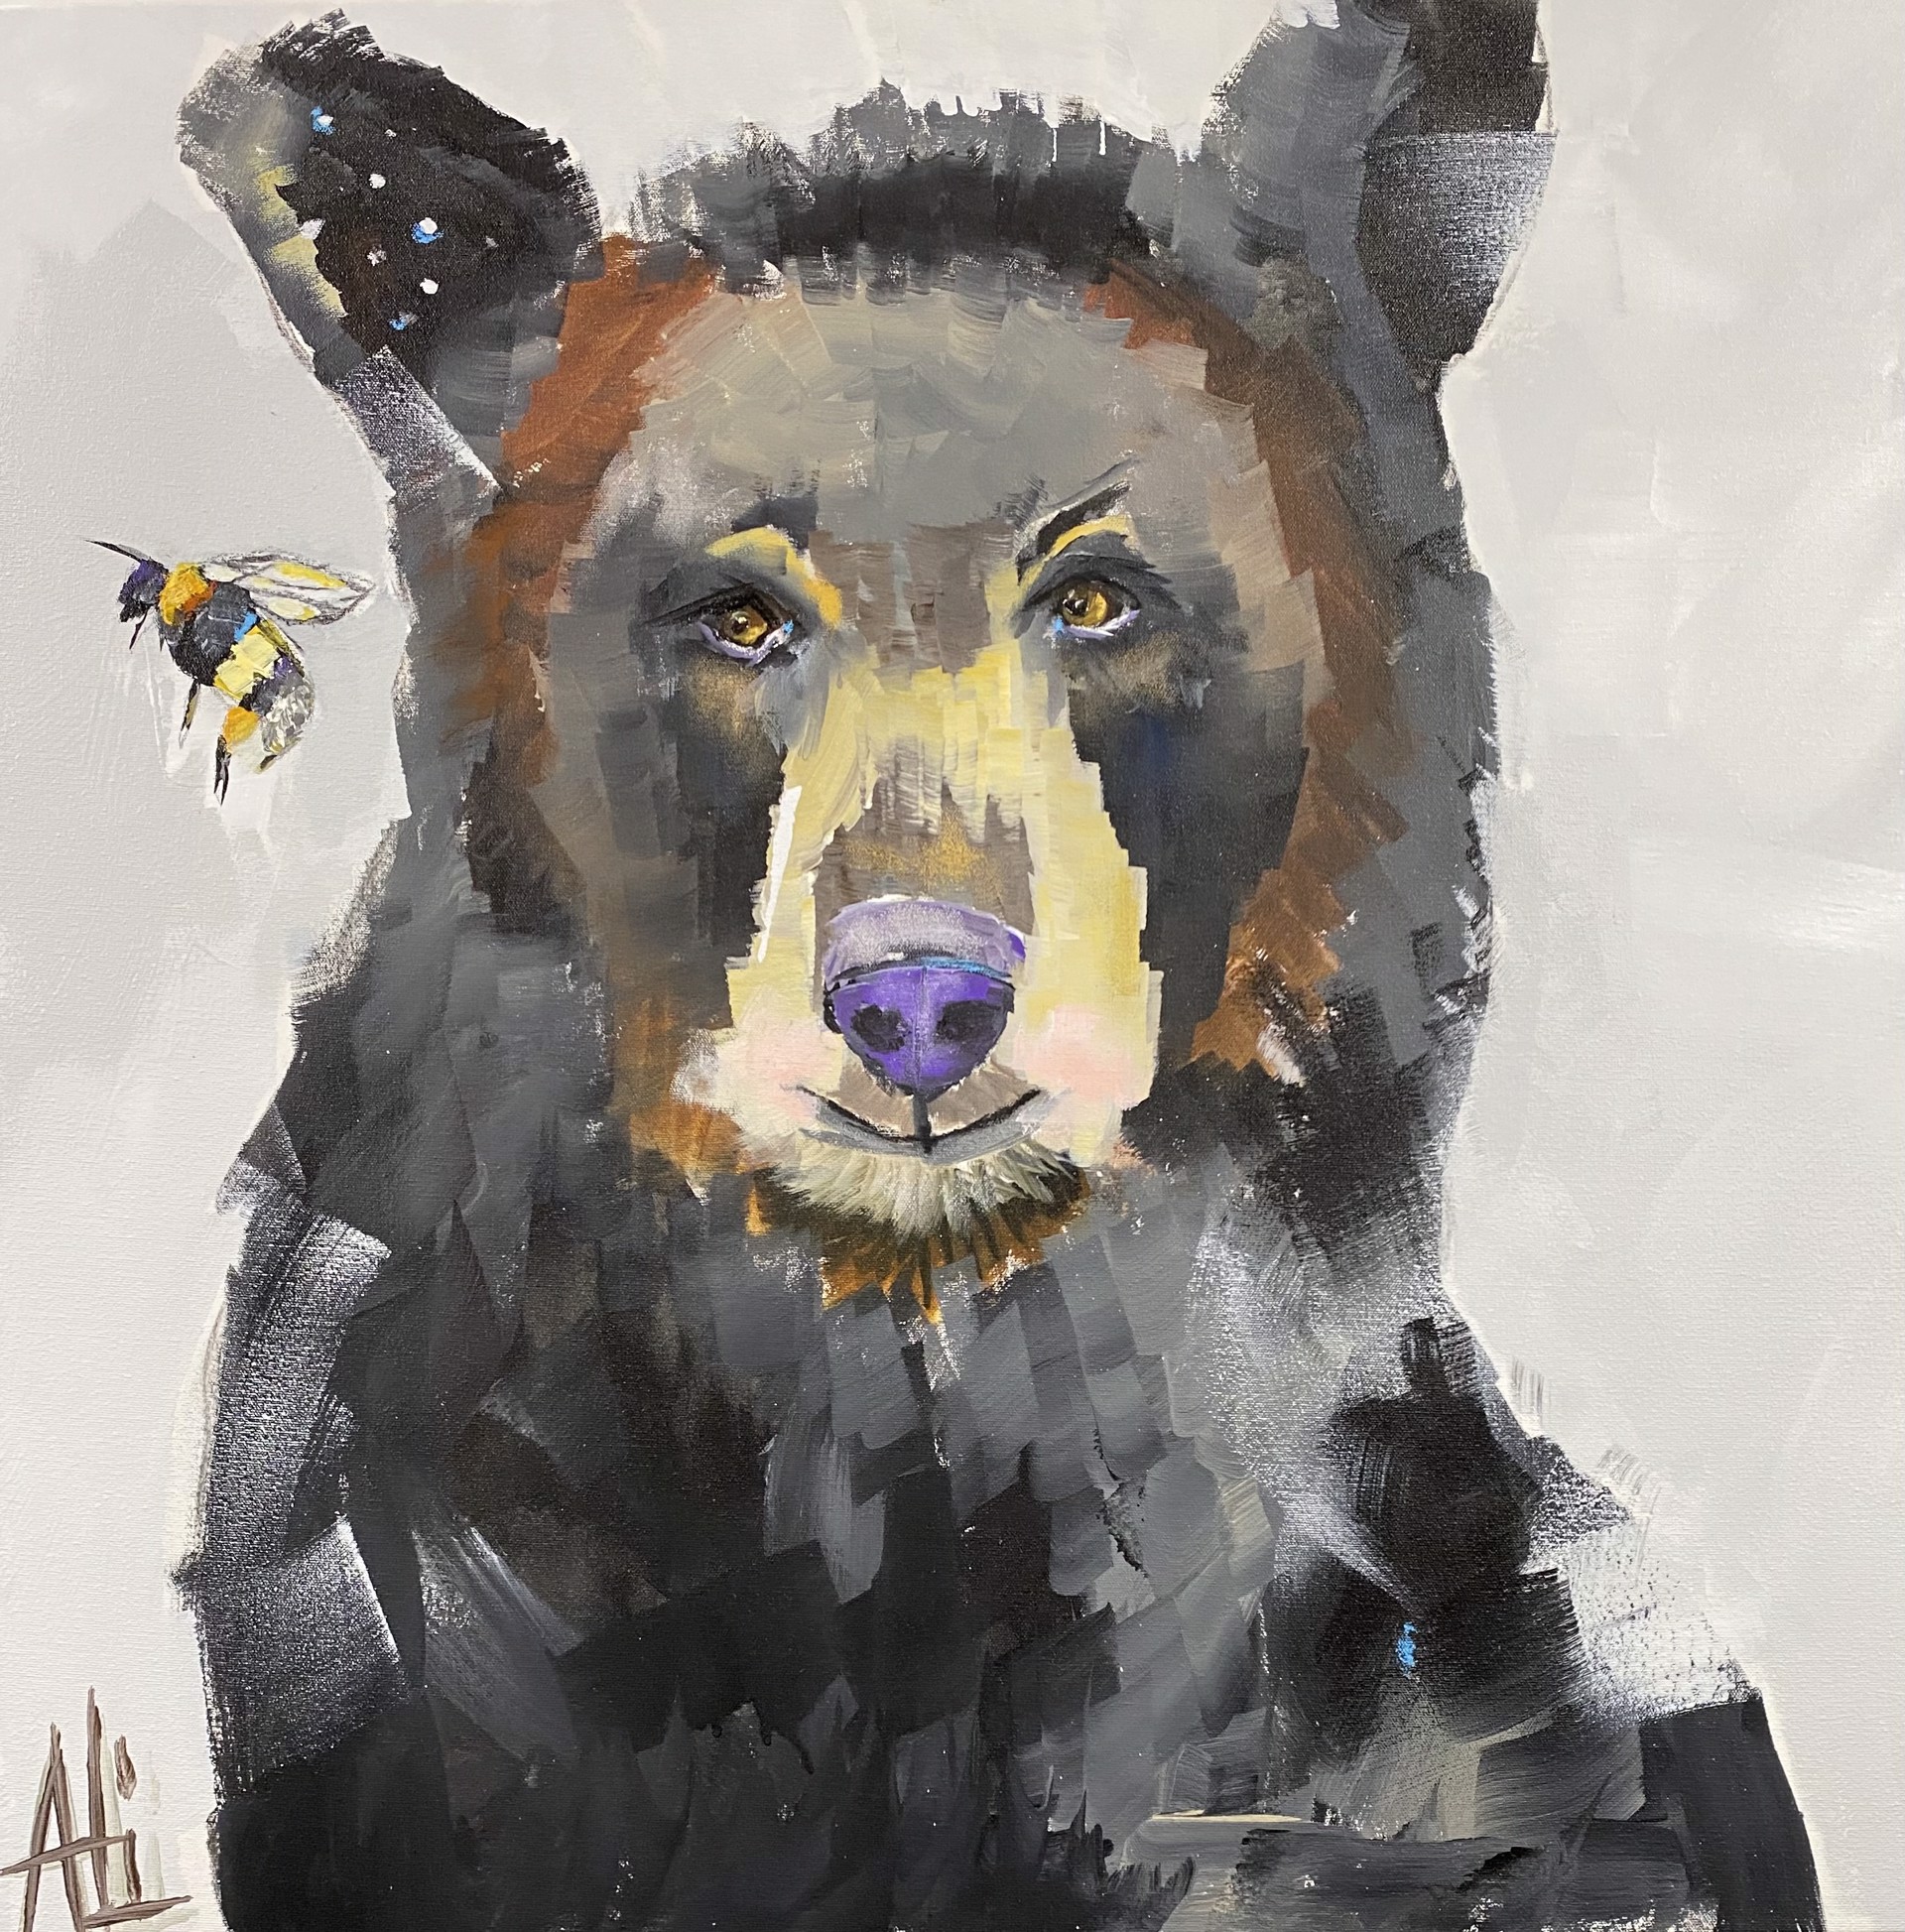 The Bears and The Bees by Ali Leja